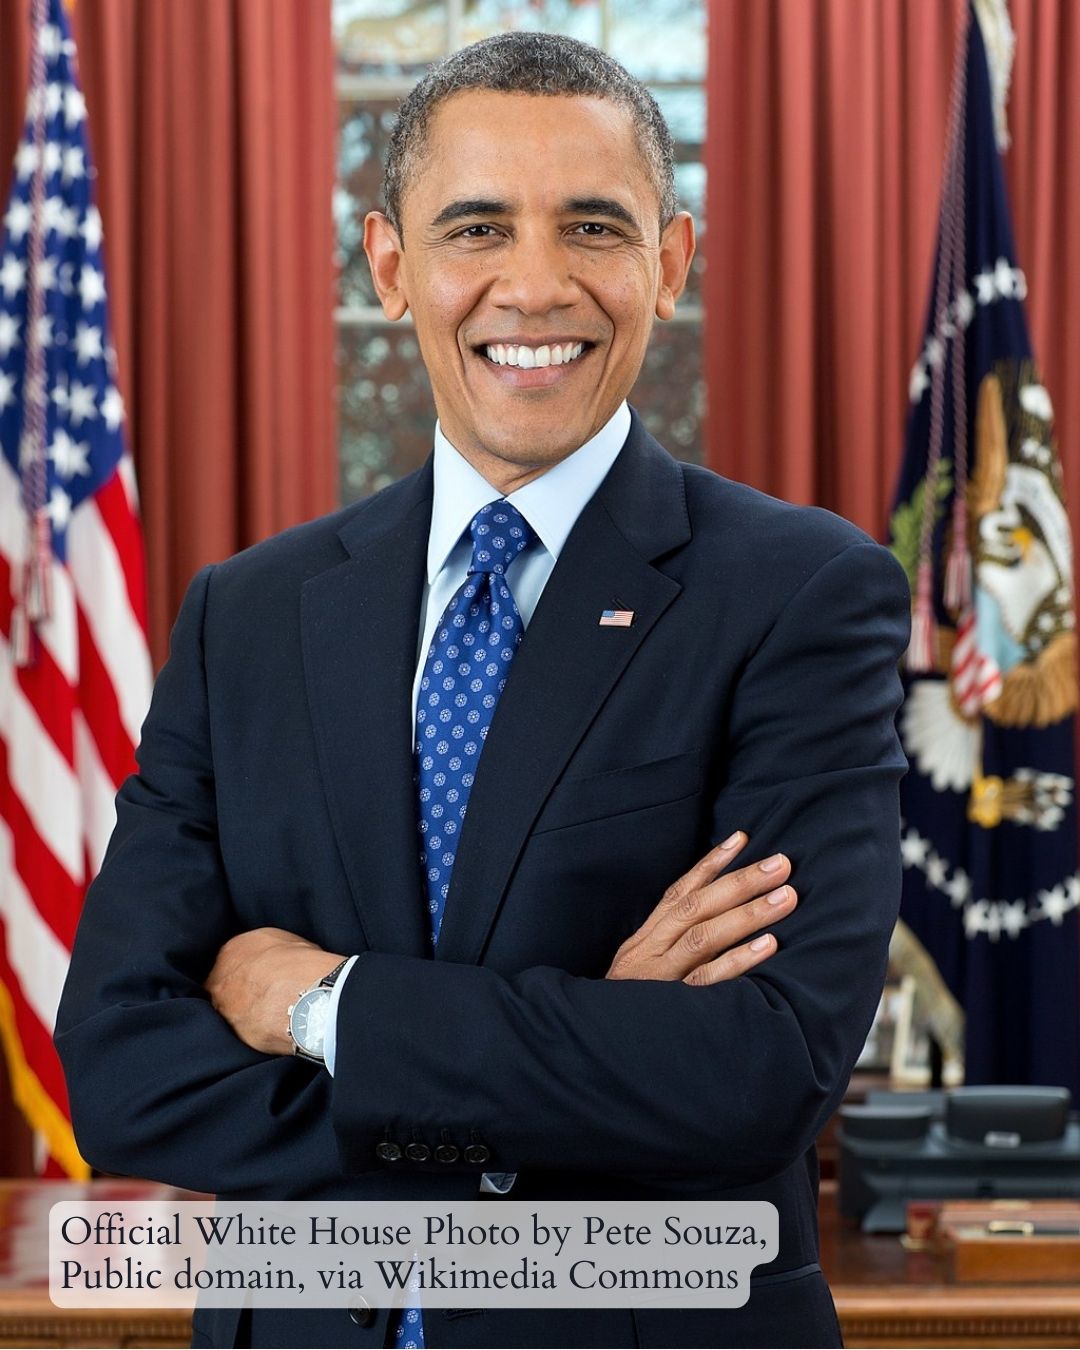 Barack Obama, the first African-American president of the United States.